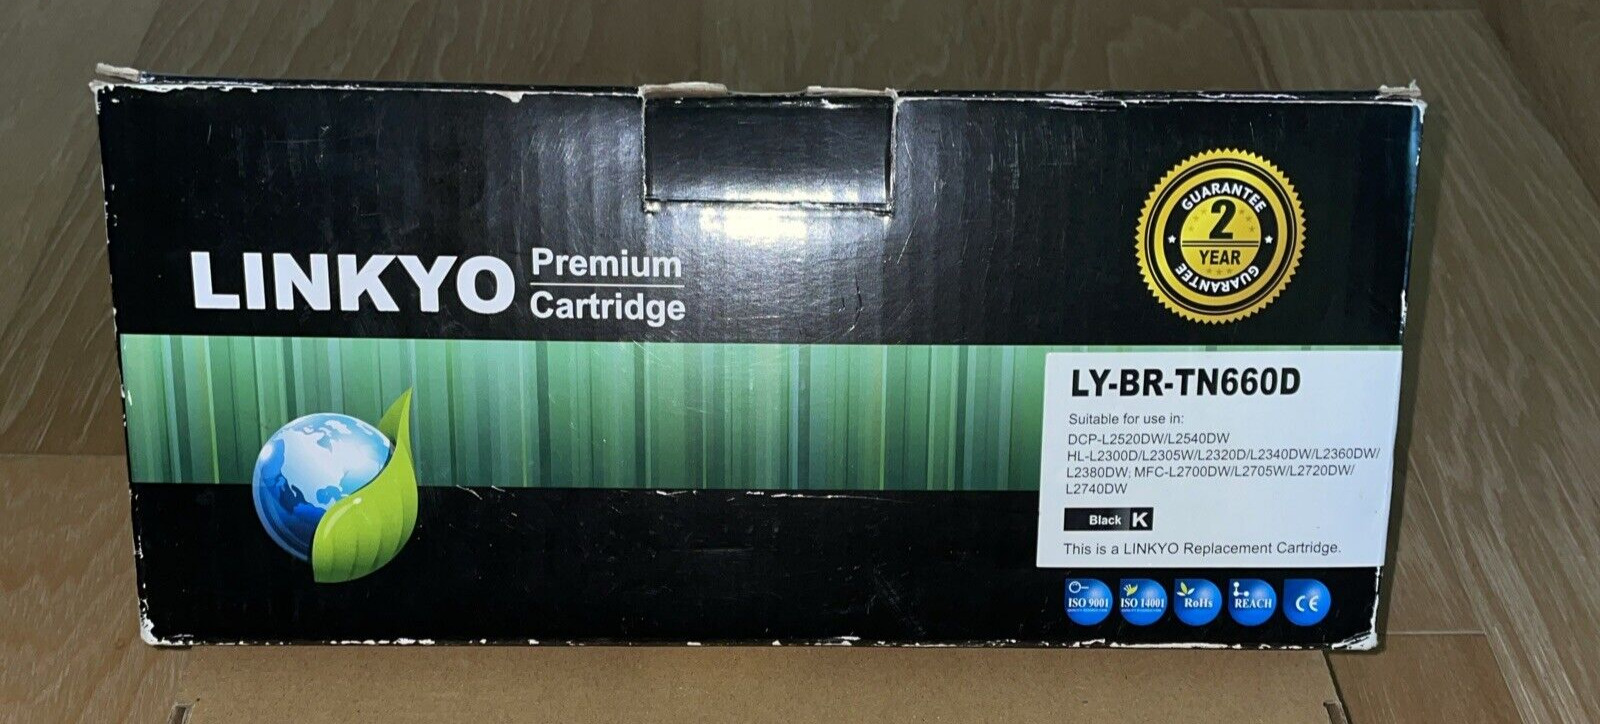 LINKYO Compatible Toner Cartridge Replacement LY-BR-TN660D (2 Cartridges) NEW